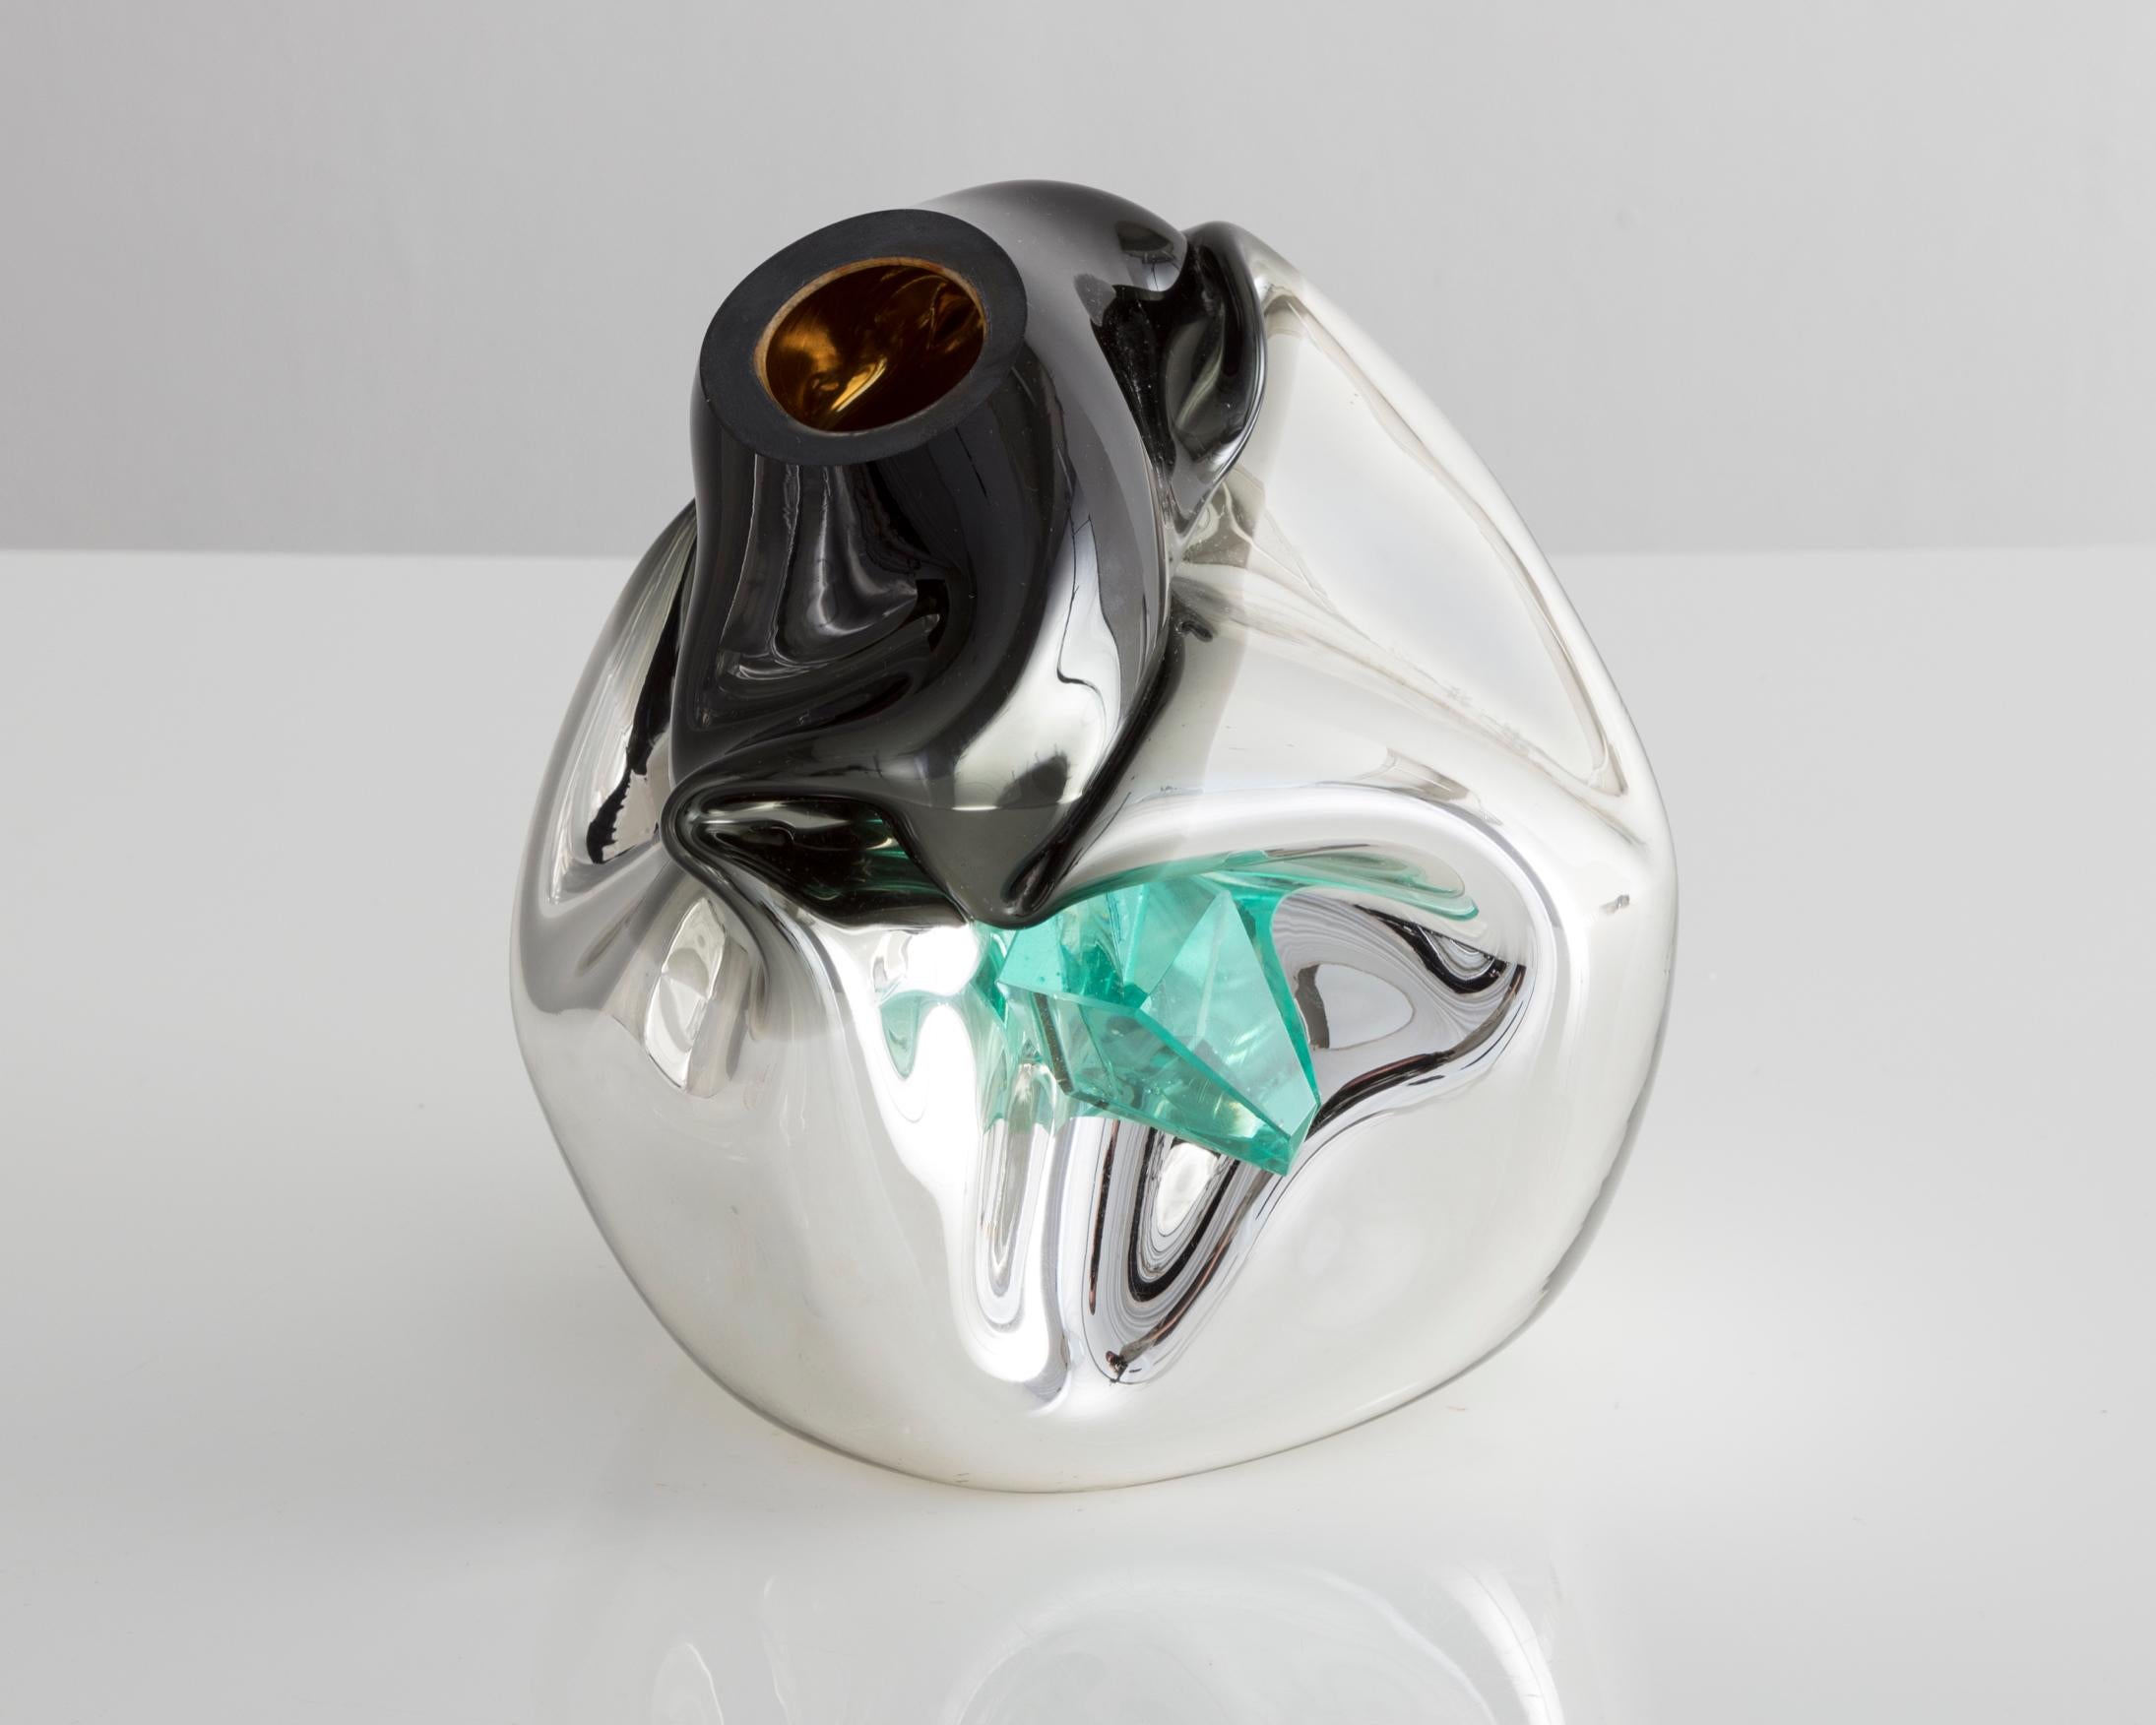 Unique petite crumpled sculptural vessel in silver mirrorized hand blown glass with applied glass crystal. Designed and made by Jeff Zimmerman, USA, 2017.

Limited number available. Please note that each item may differ slightly in color and shape.